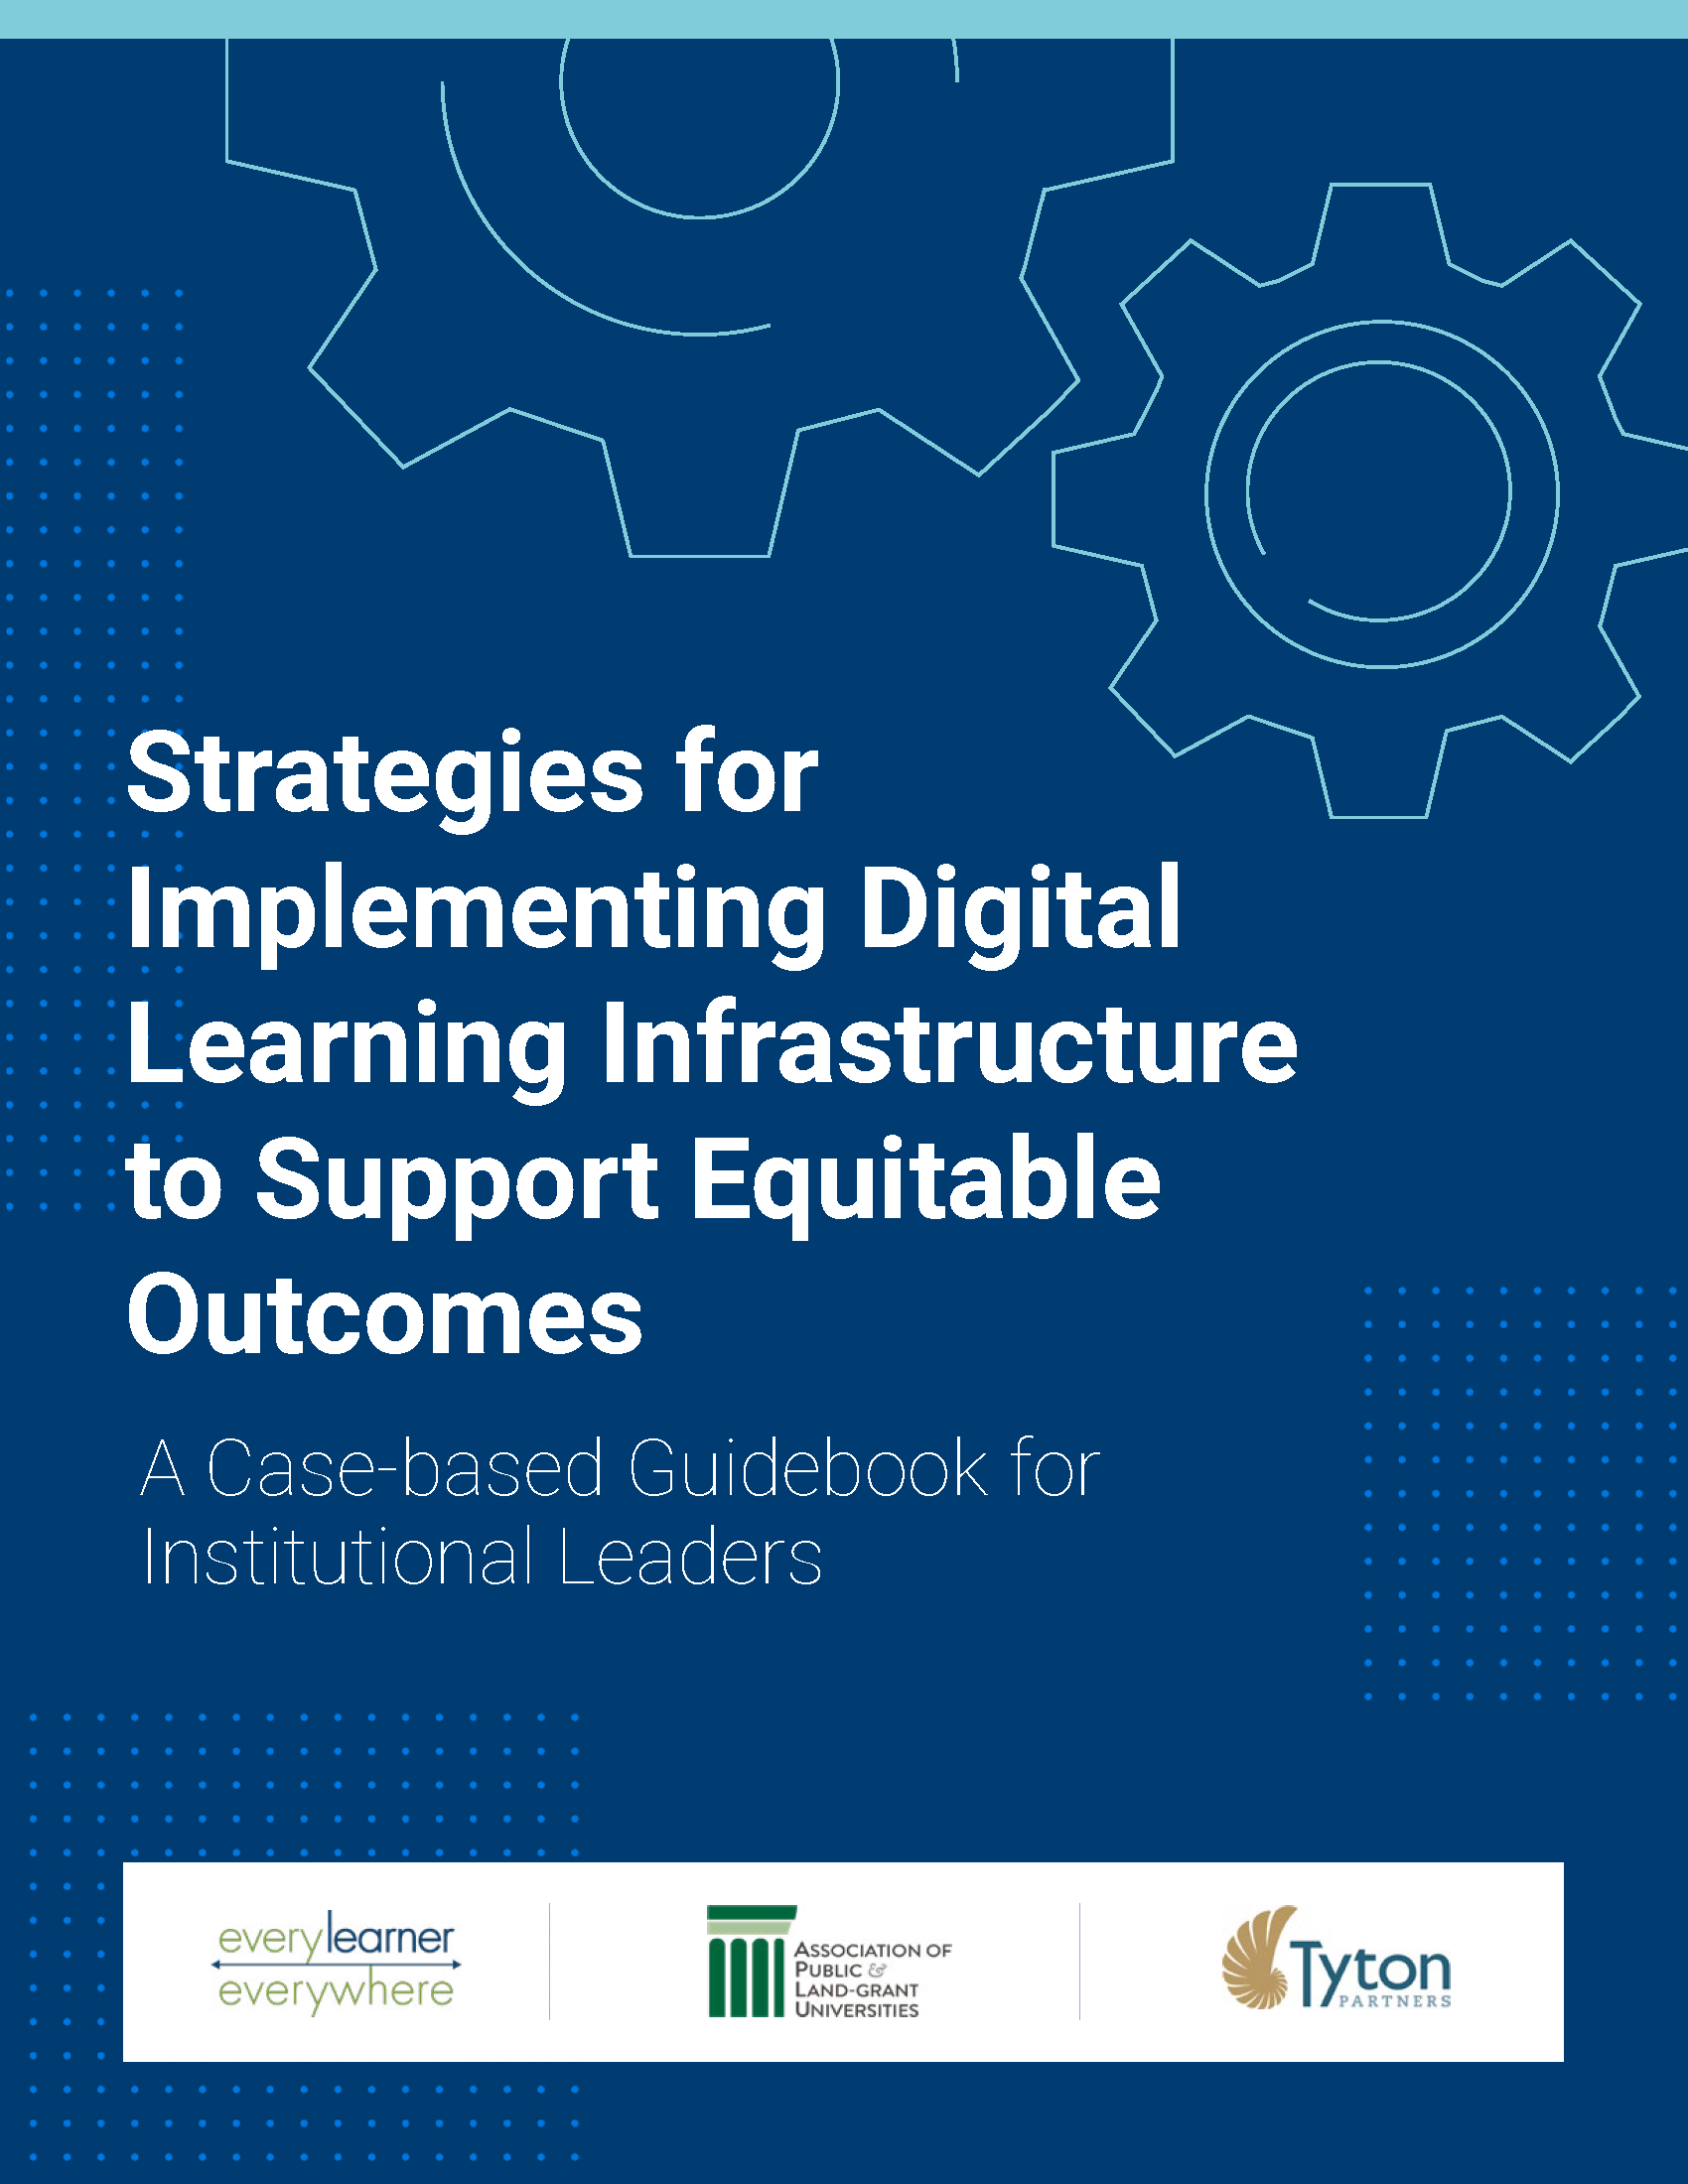 Strategies for Implementing Digital Learning Infrastructure Cover page